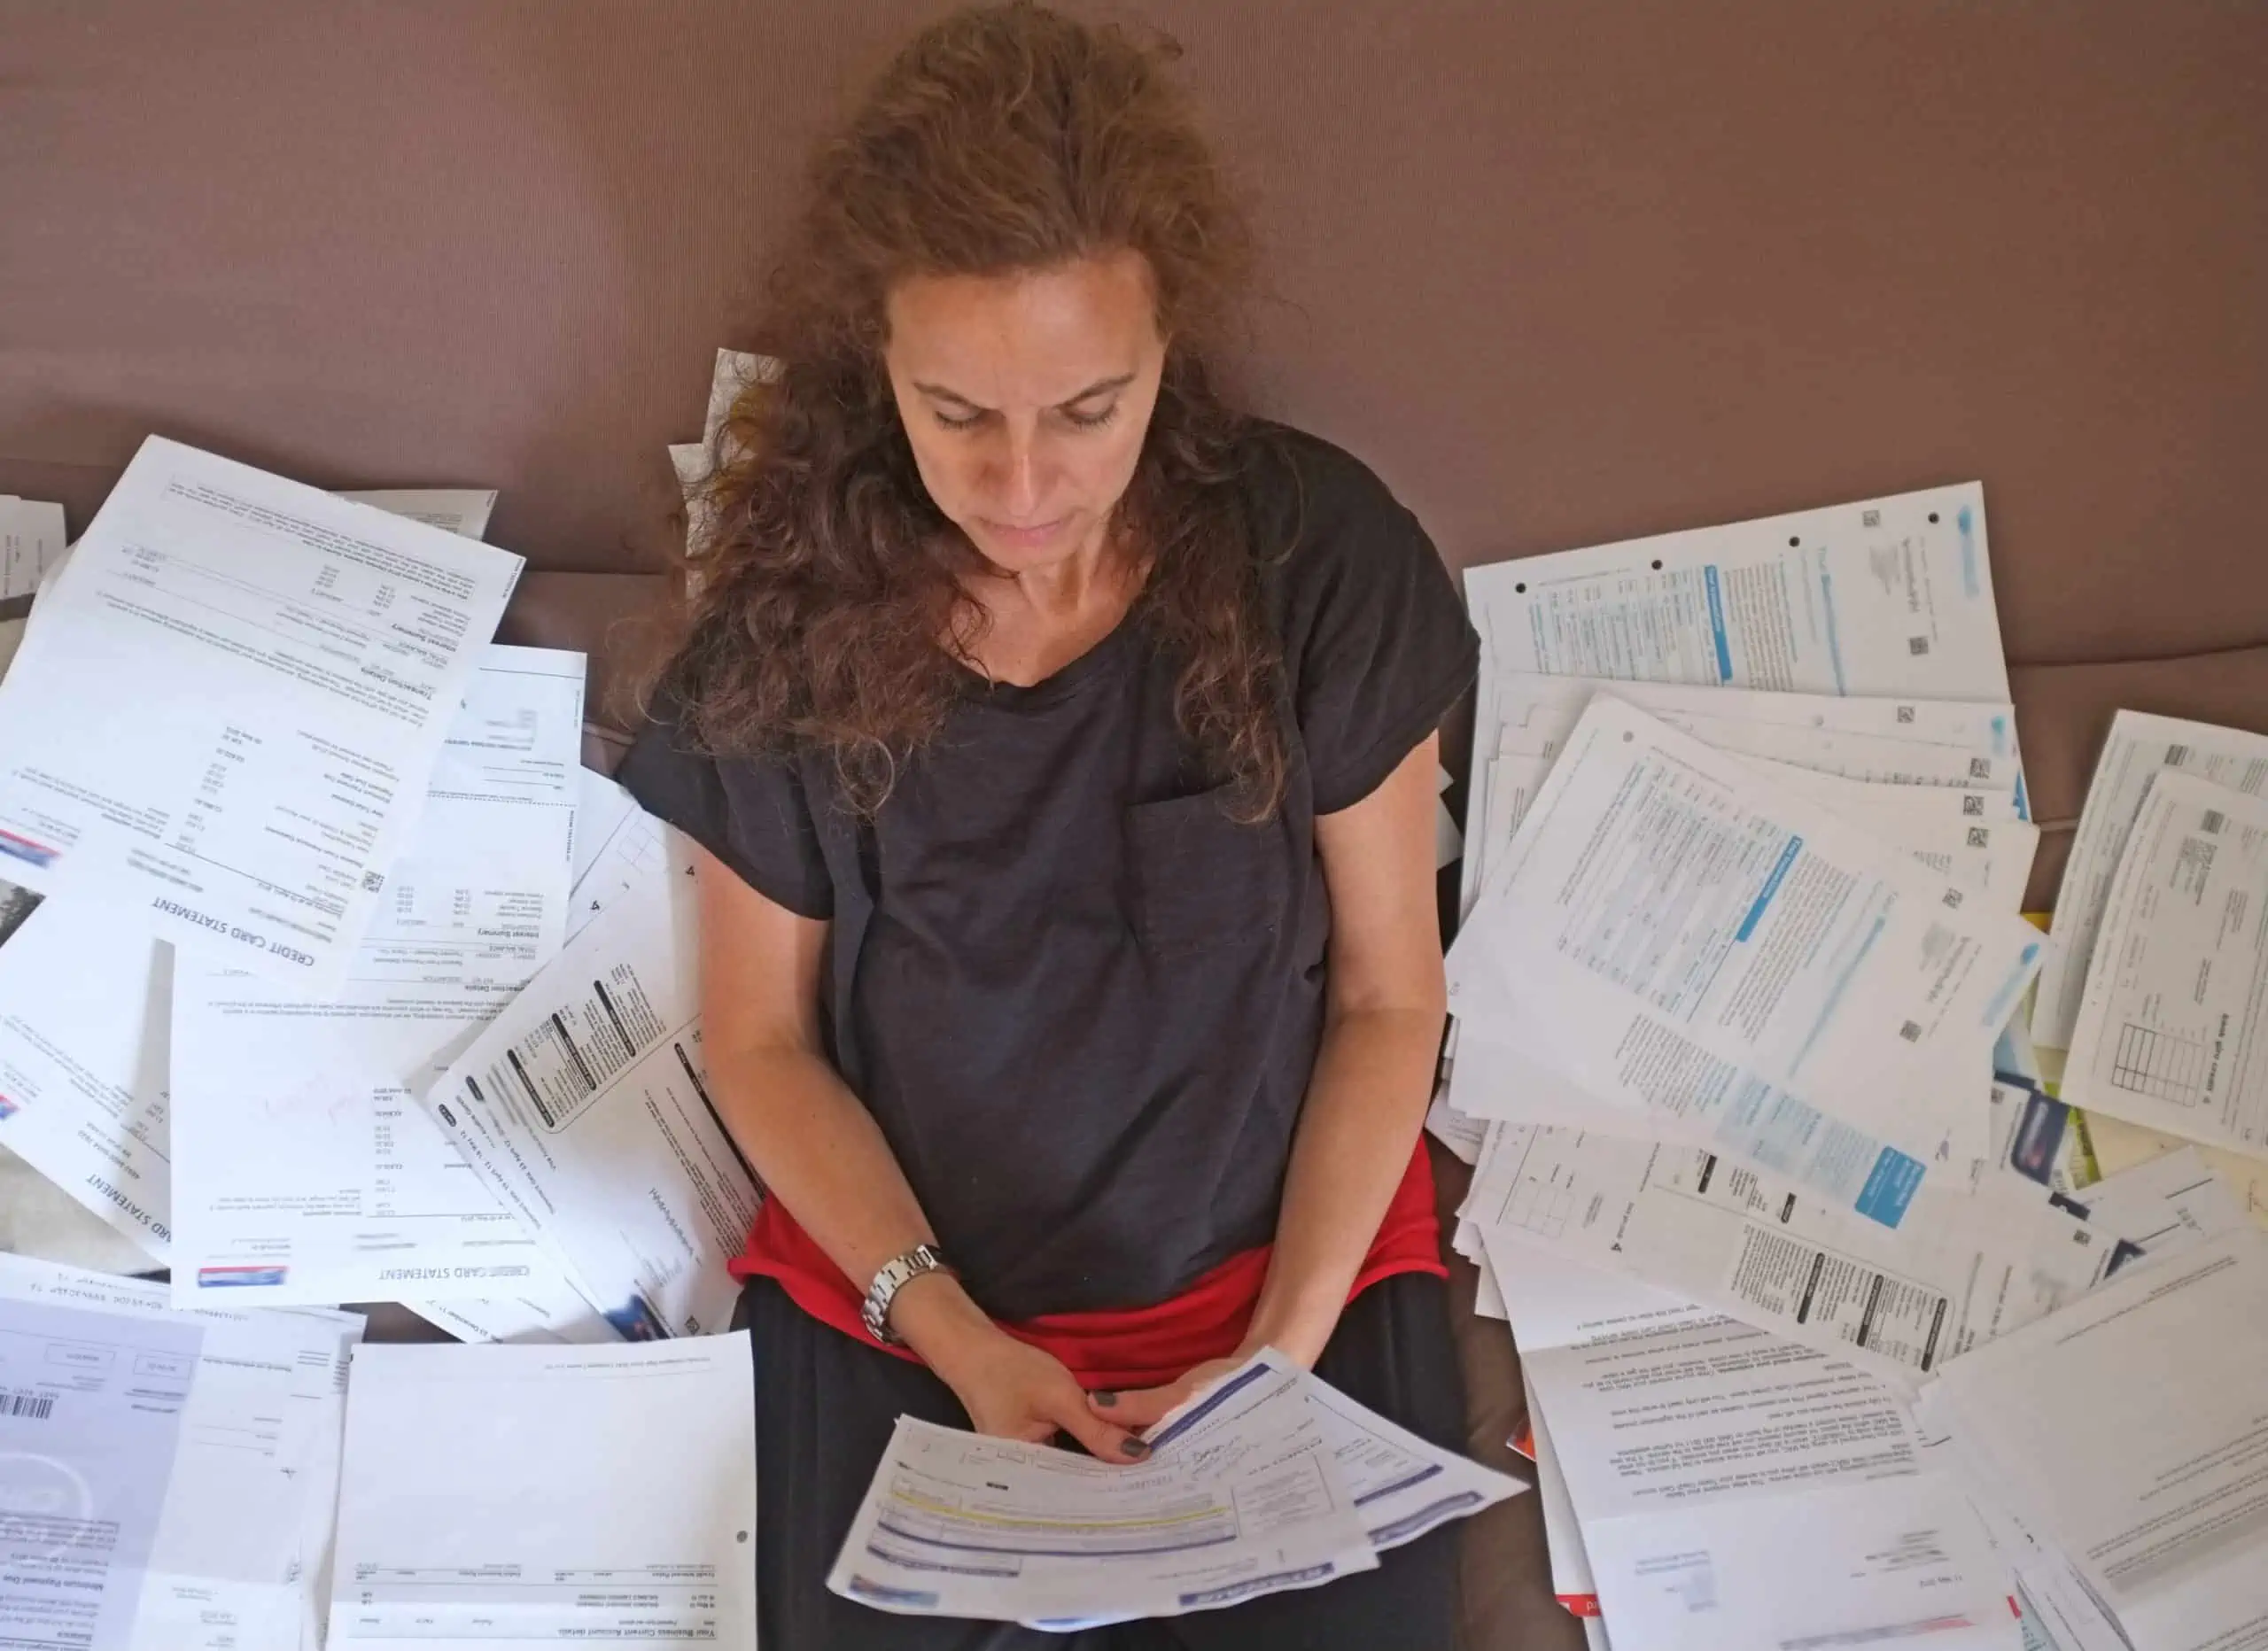 Caucasian woman sitting on a leather couch managing money by sorting through many financial documents